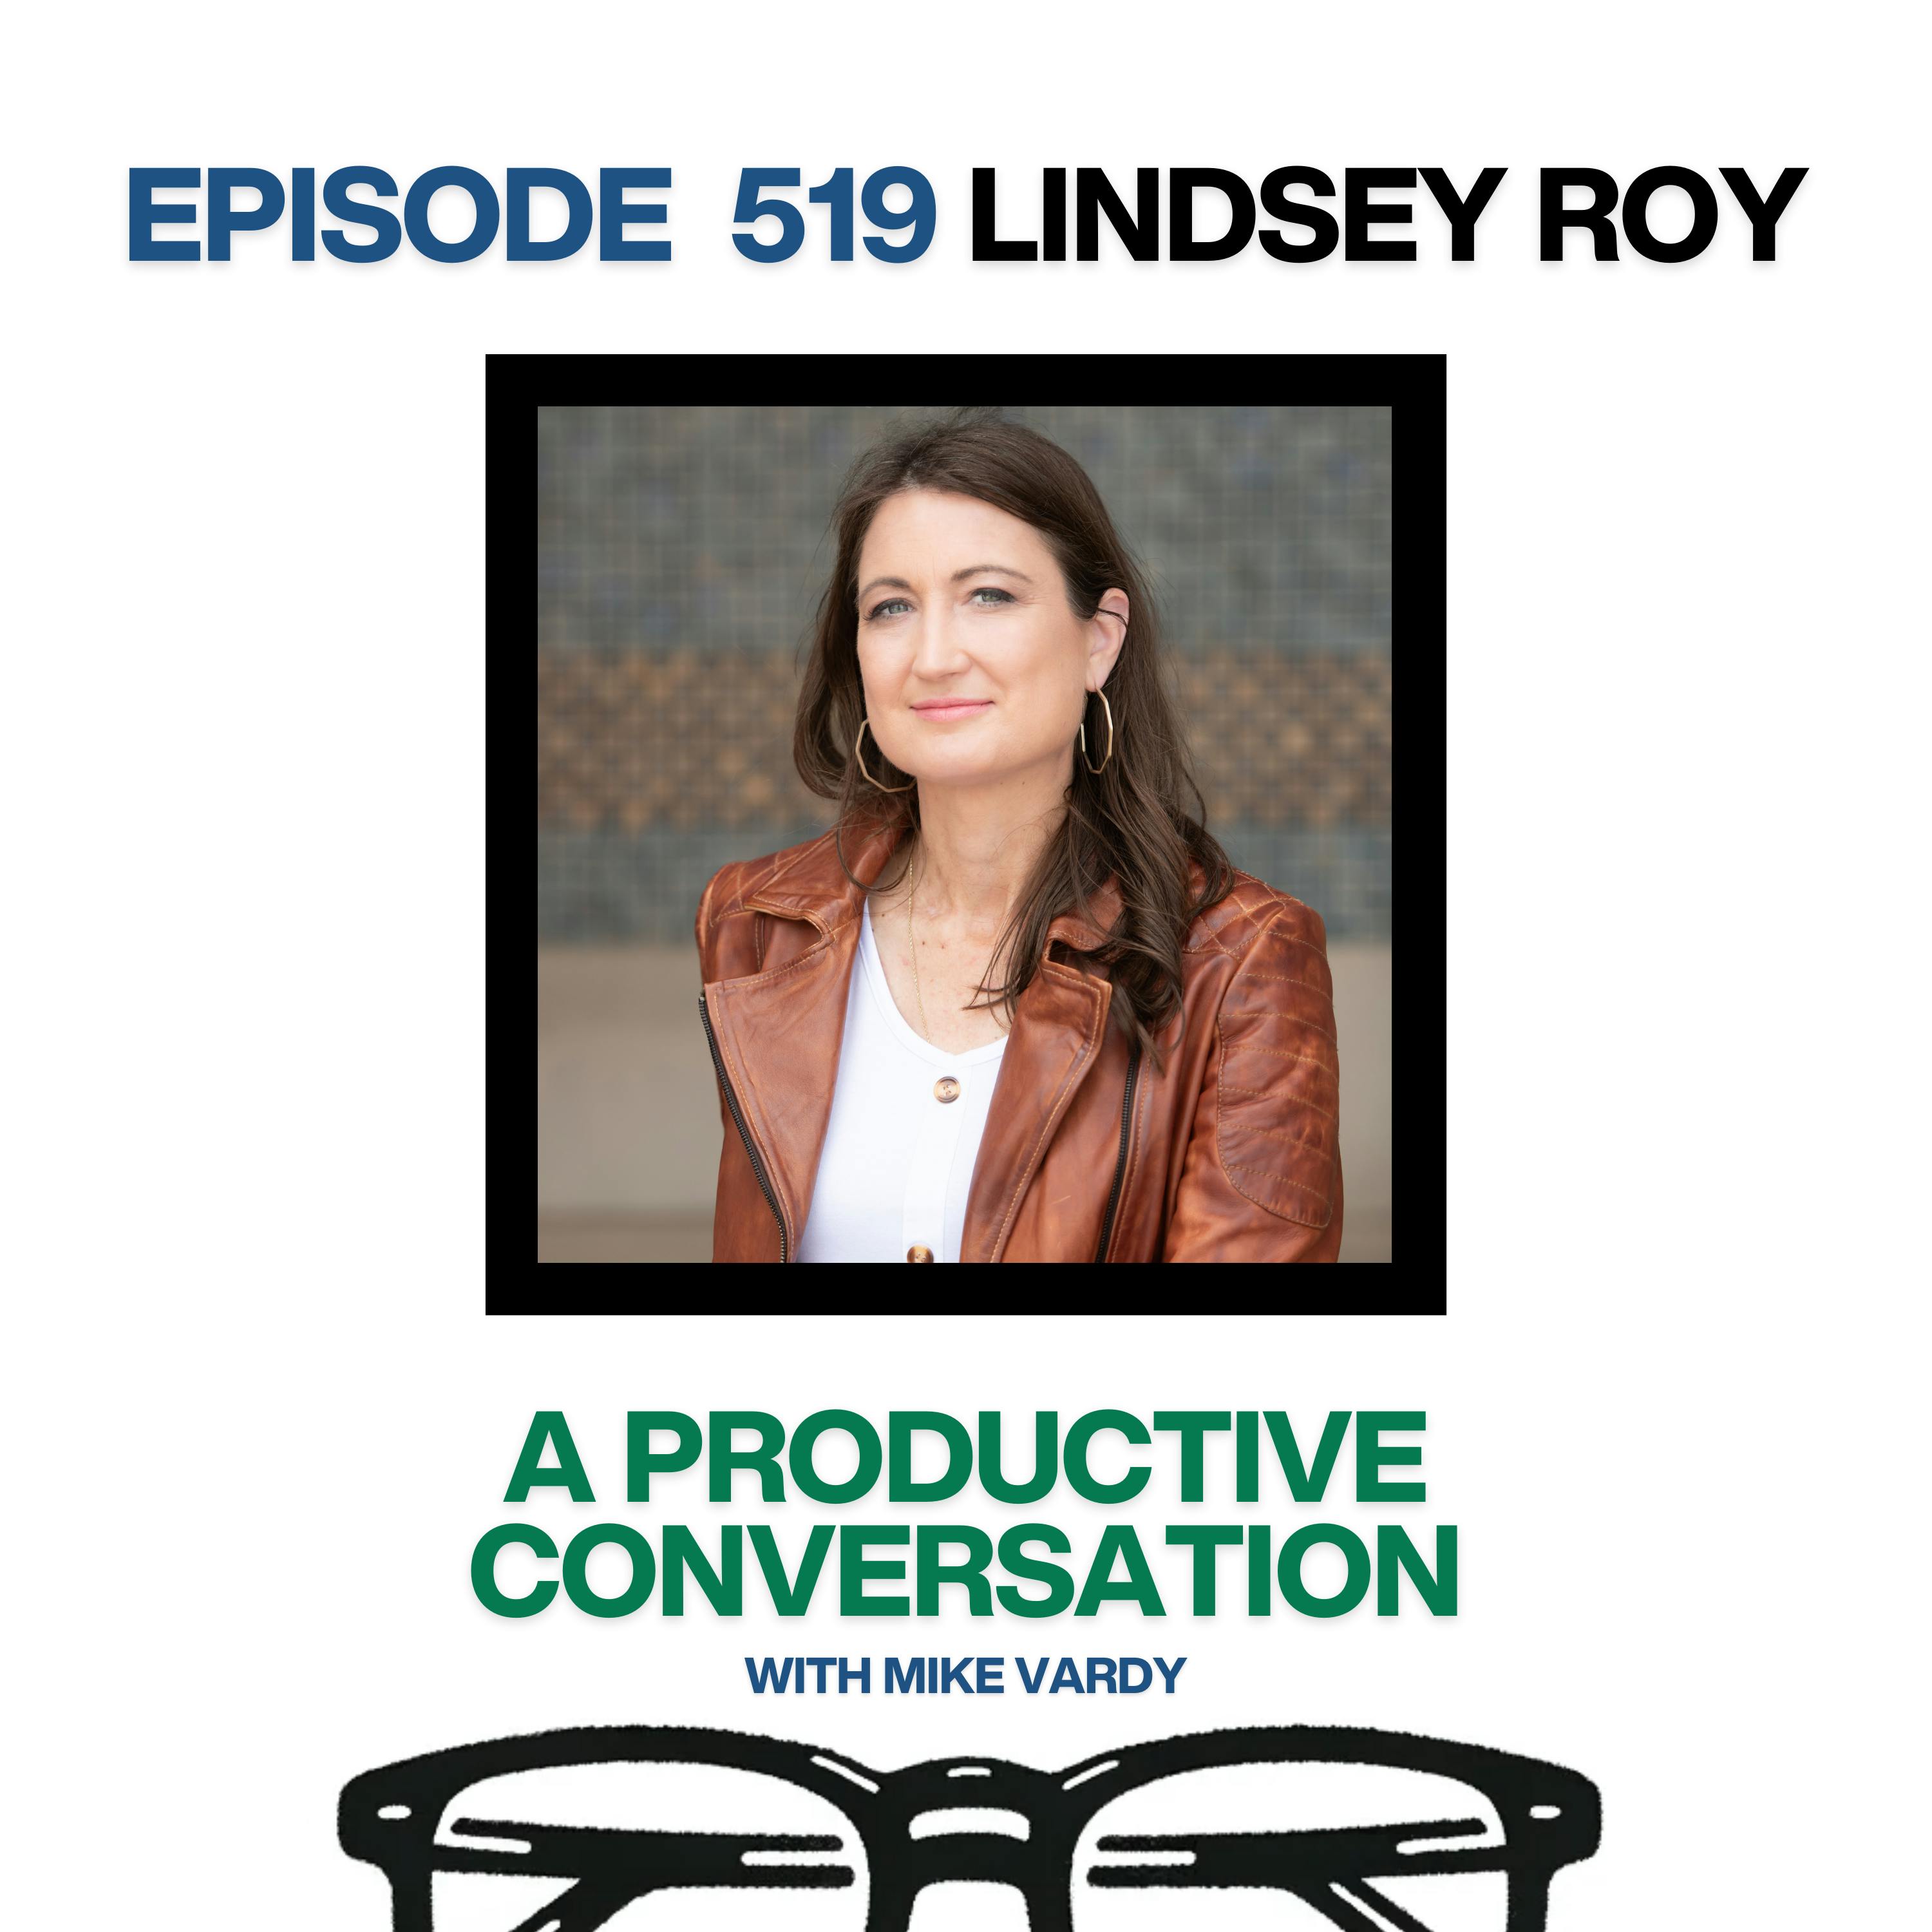 Lindsey Roy Talks About Overcoming Adversity with Perspective